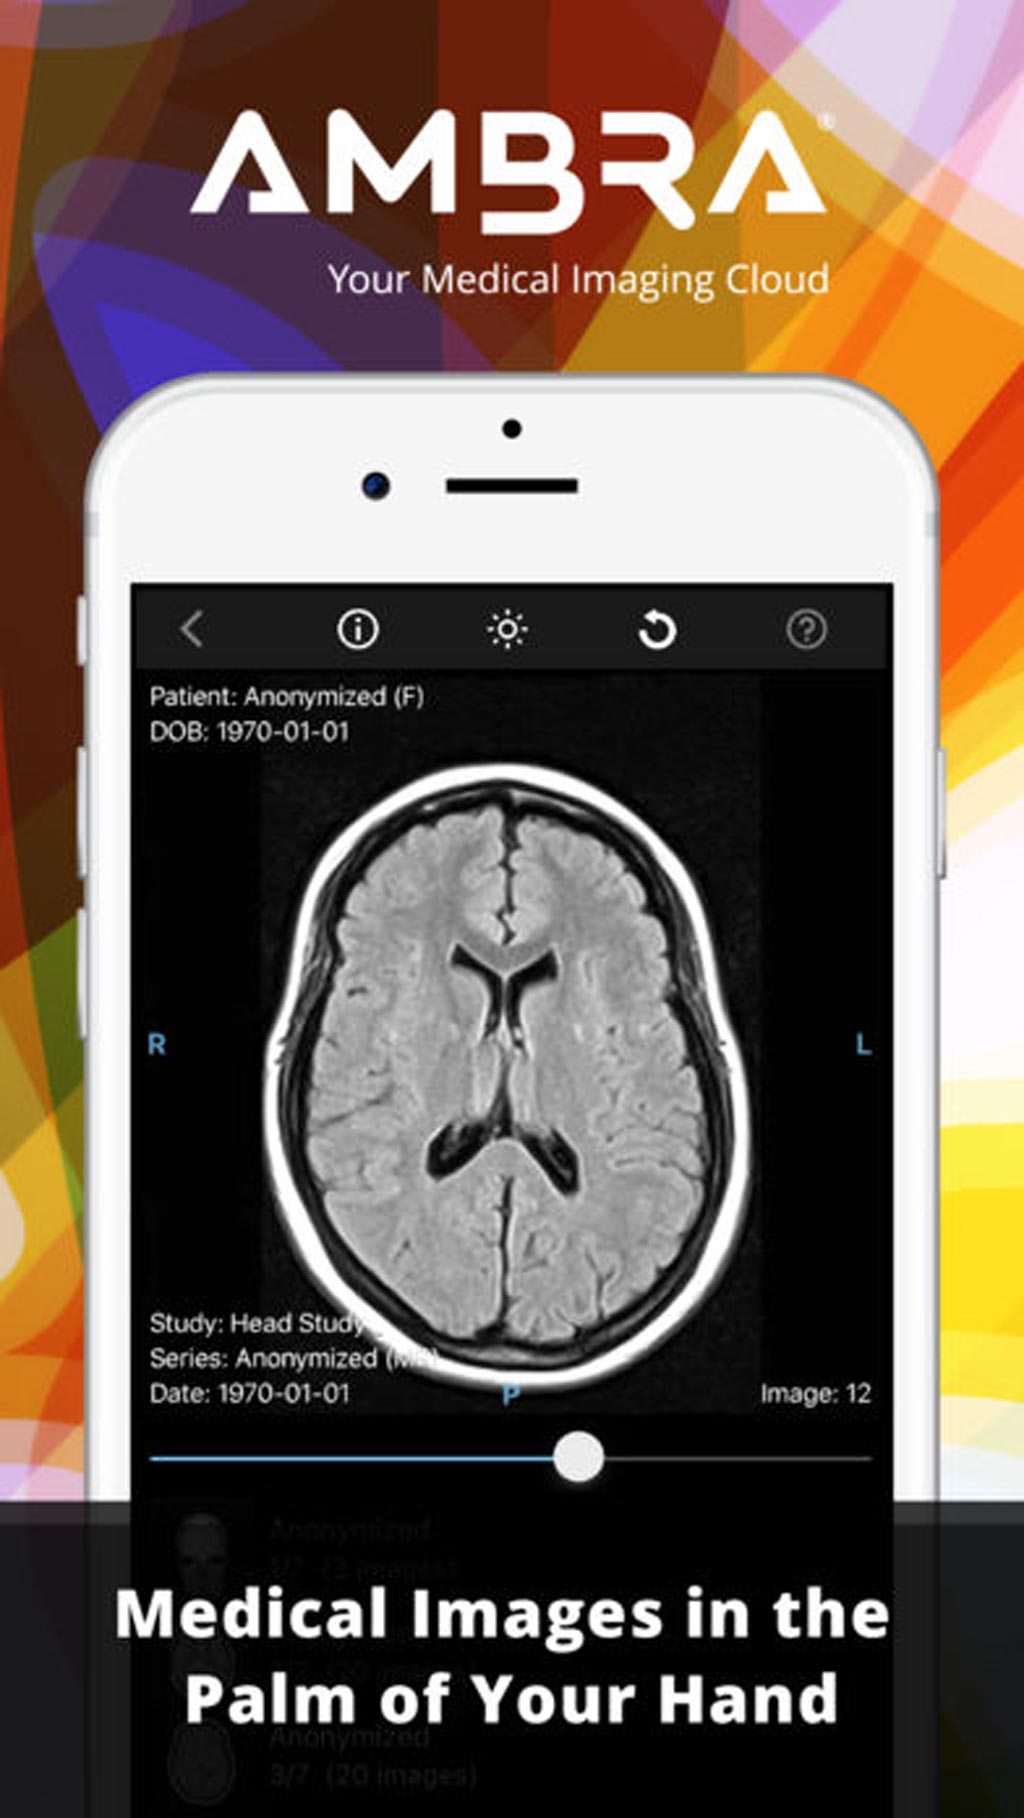 Image: A new app allows medical images to be viewed on an iPhone (Photo courtesy of Ambra Health).